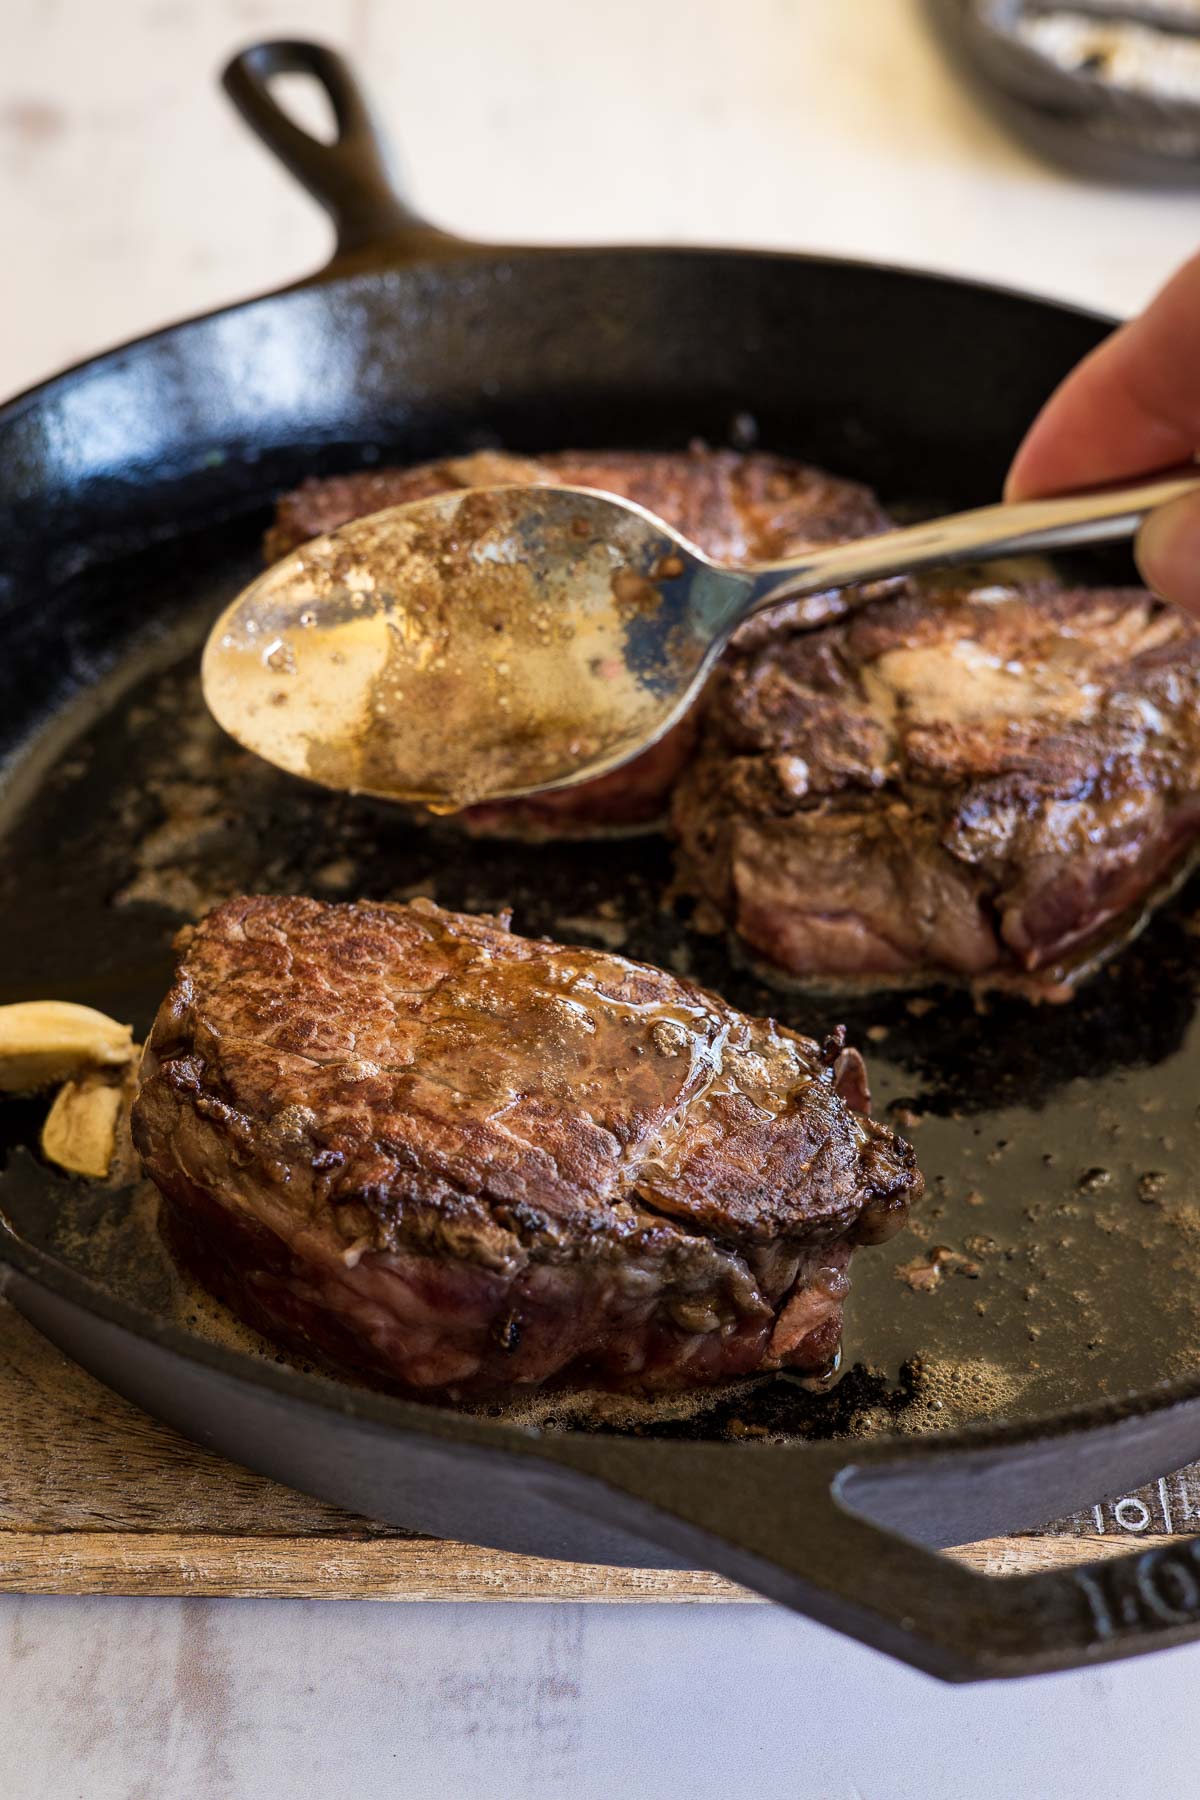 Spooning butter over cooked steaks.